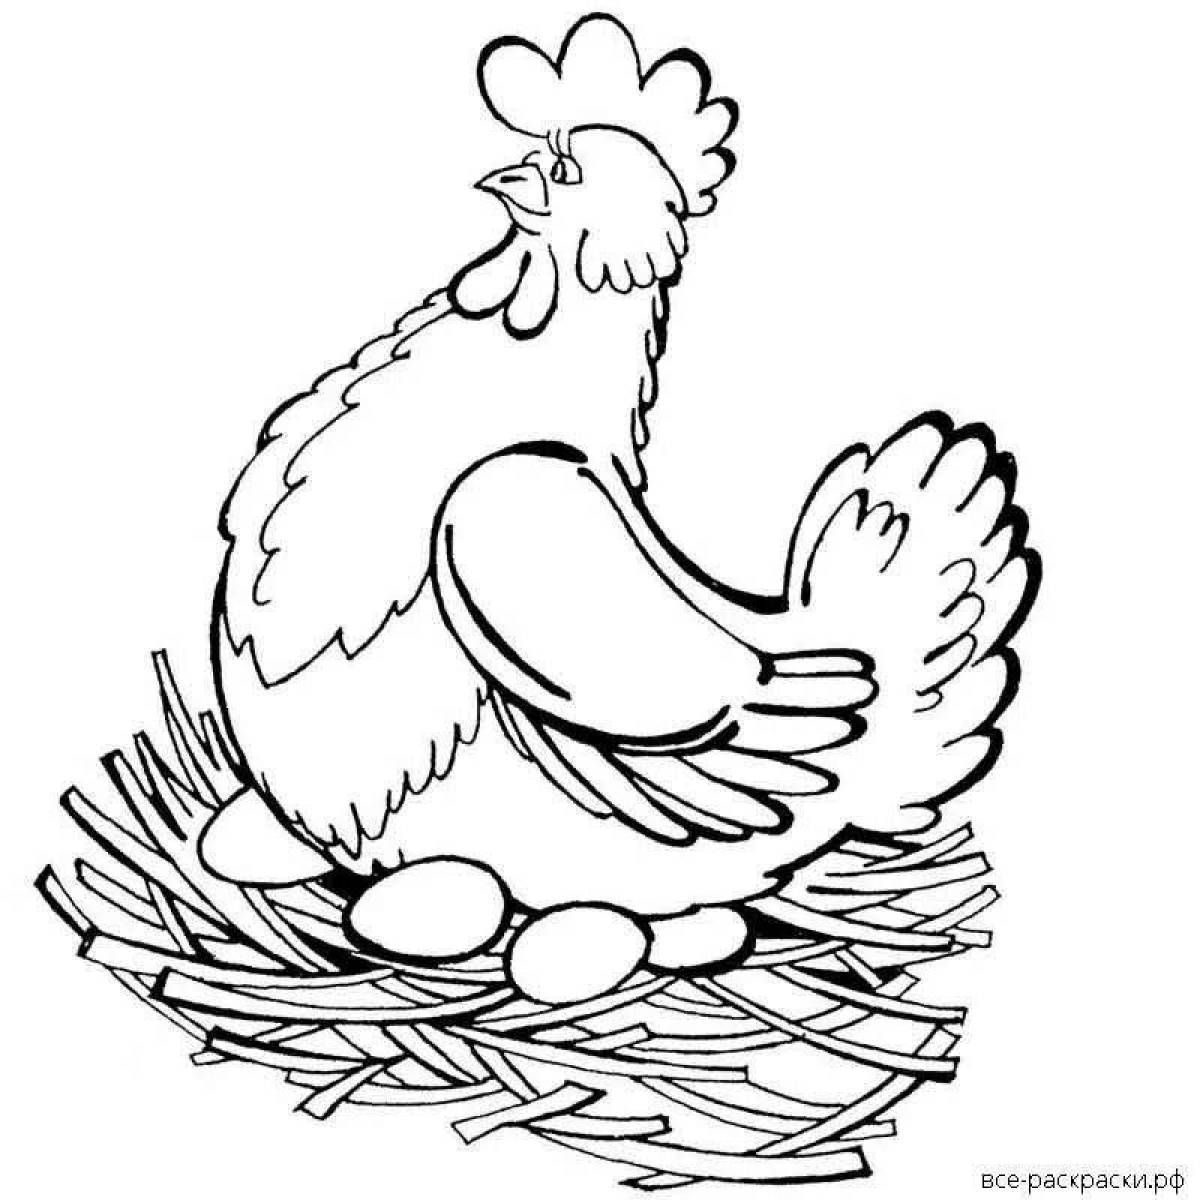 Chicken pockmarked coloring book for kids